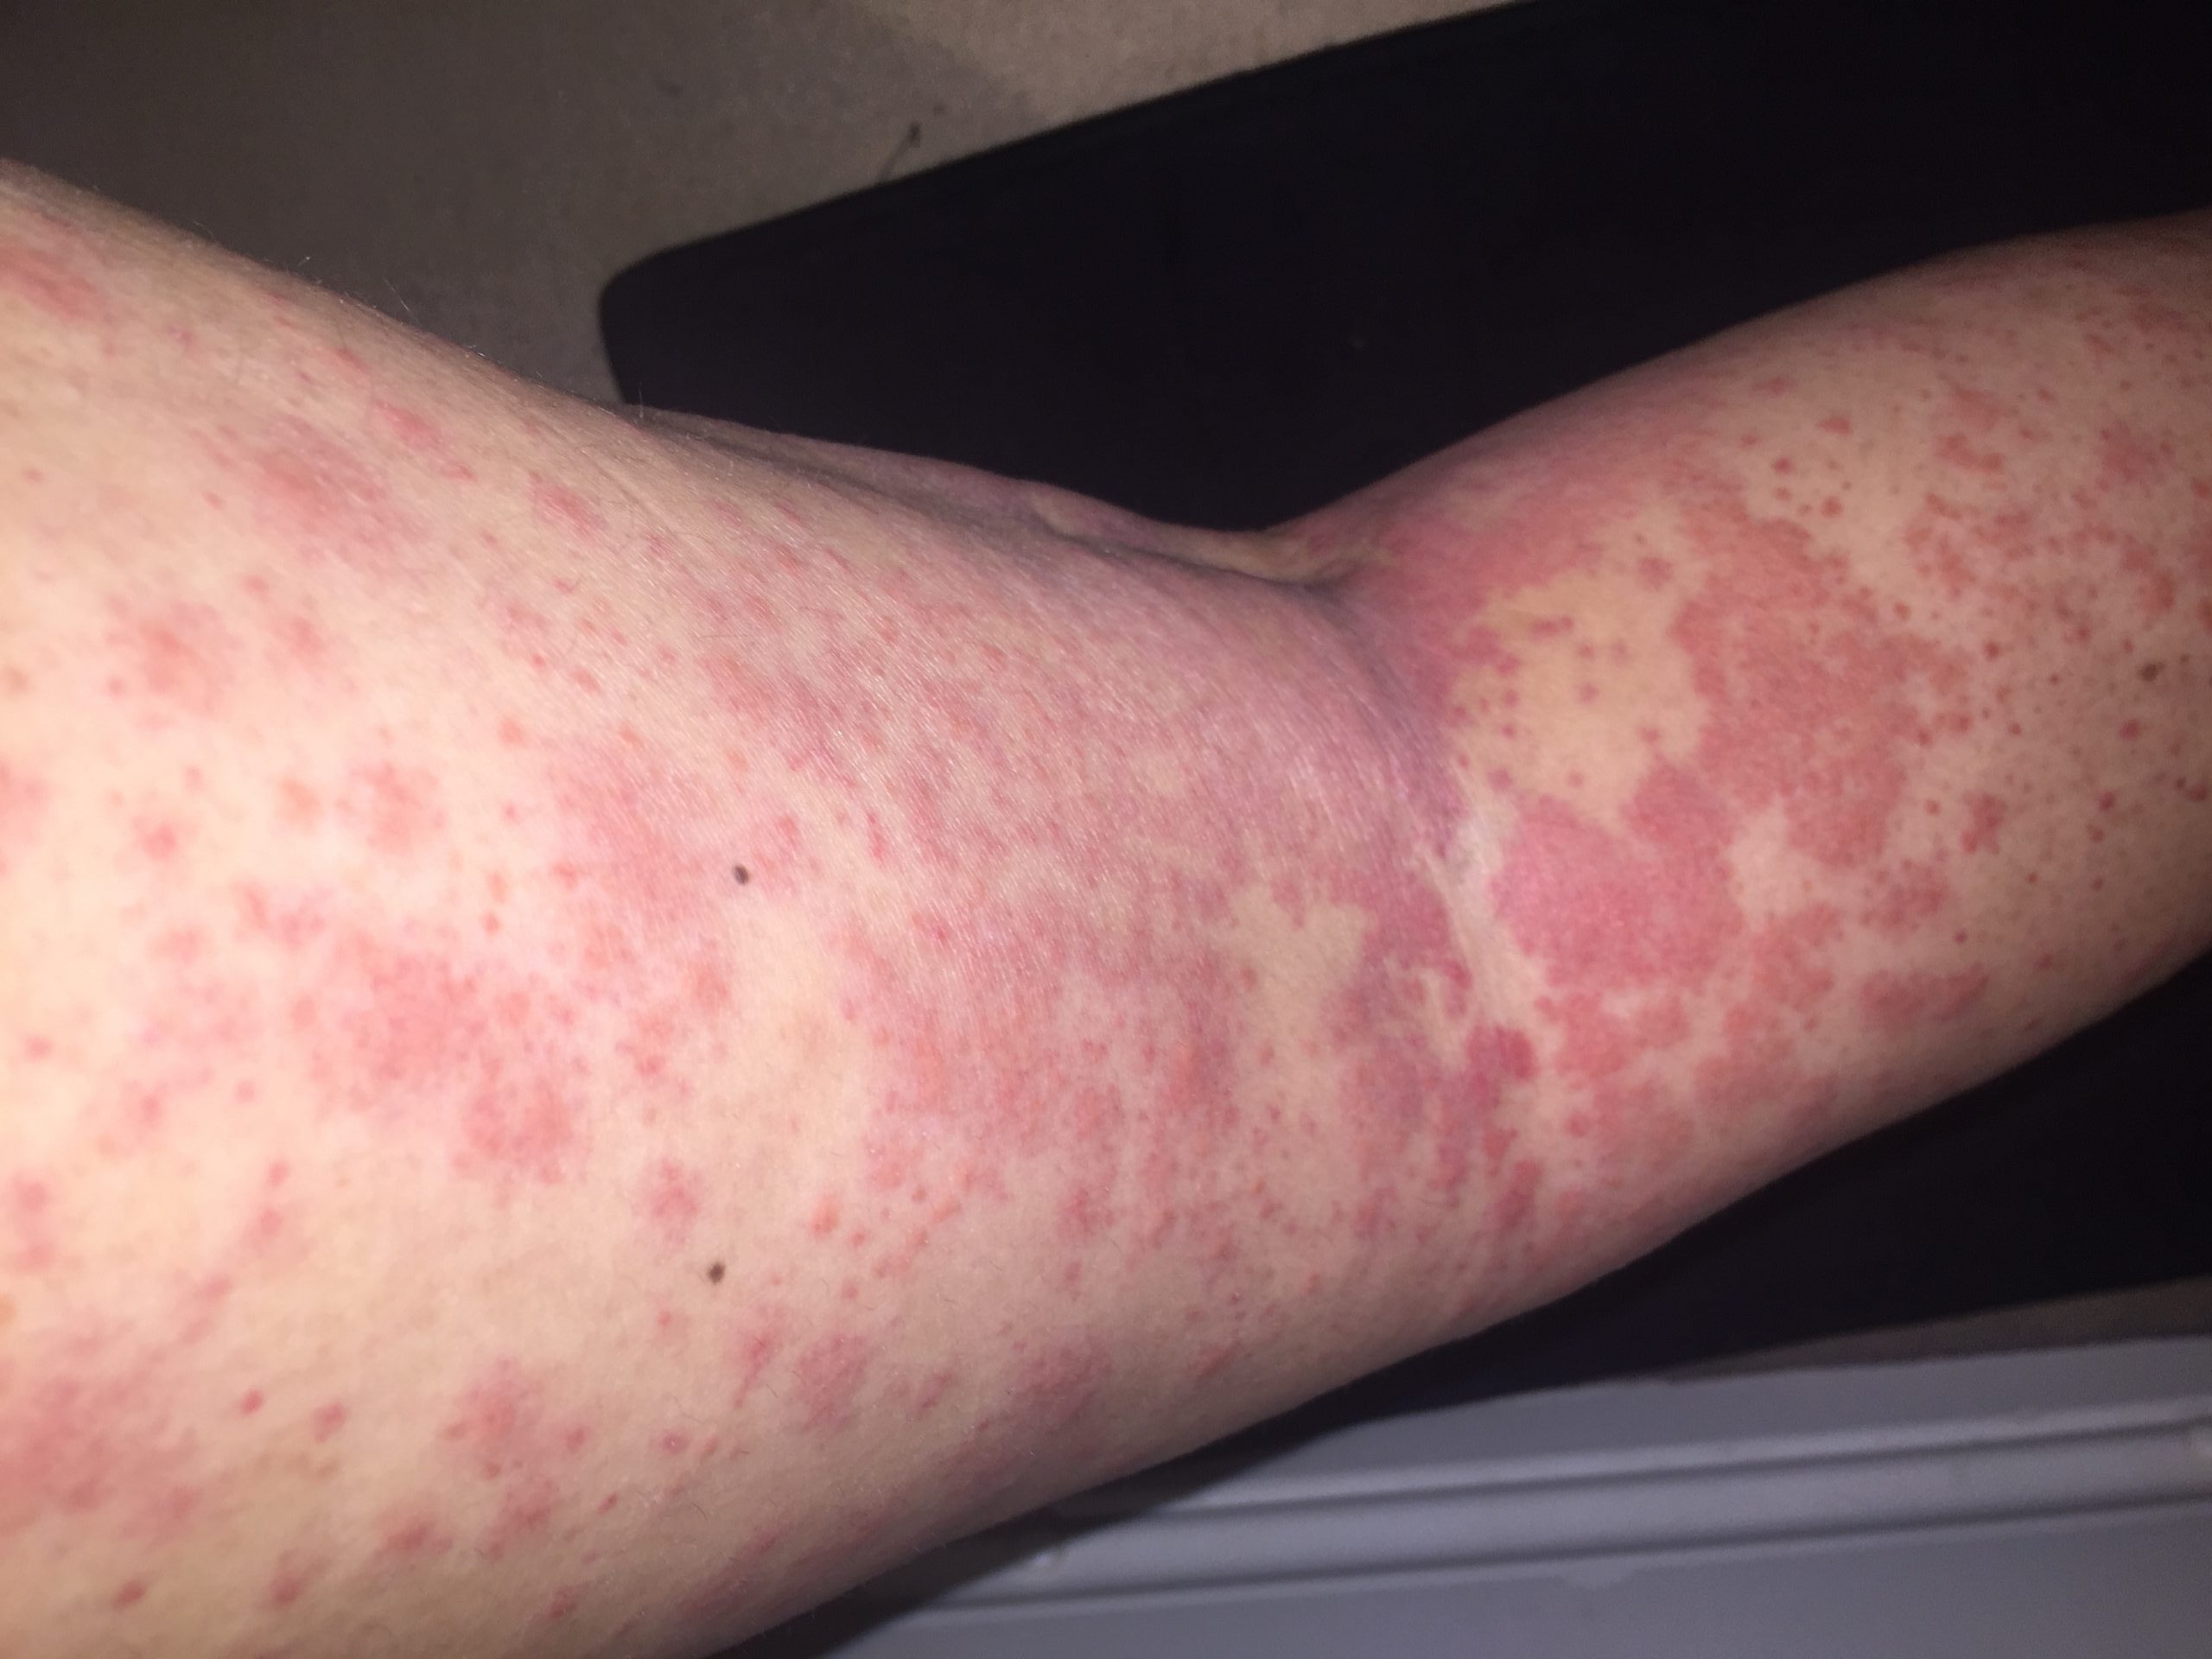 10 Serious Conditions That Rashes And Hives Can Indicate | Page 2